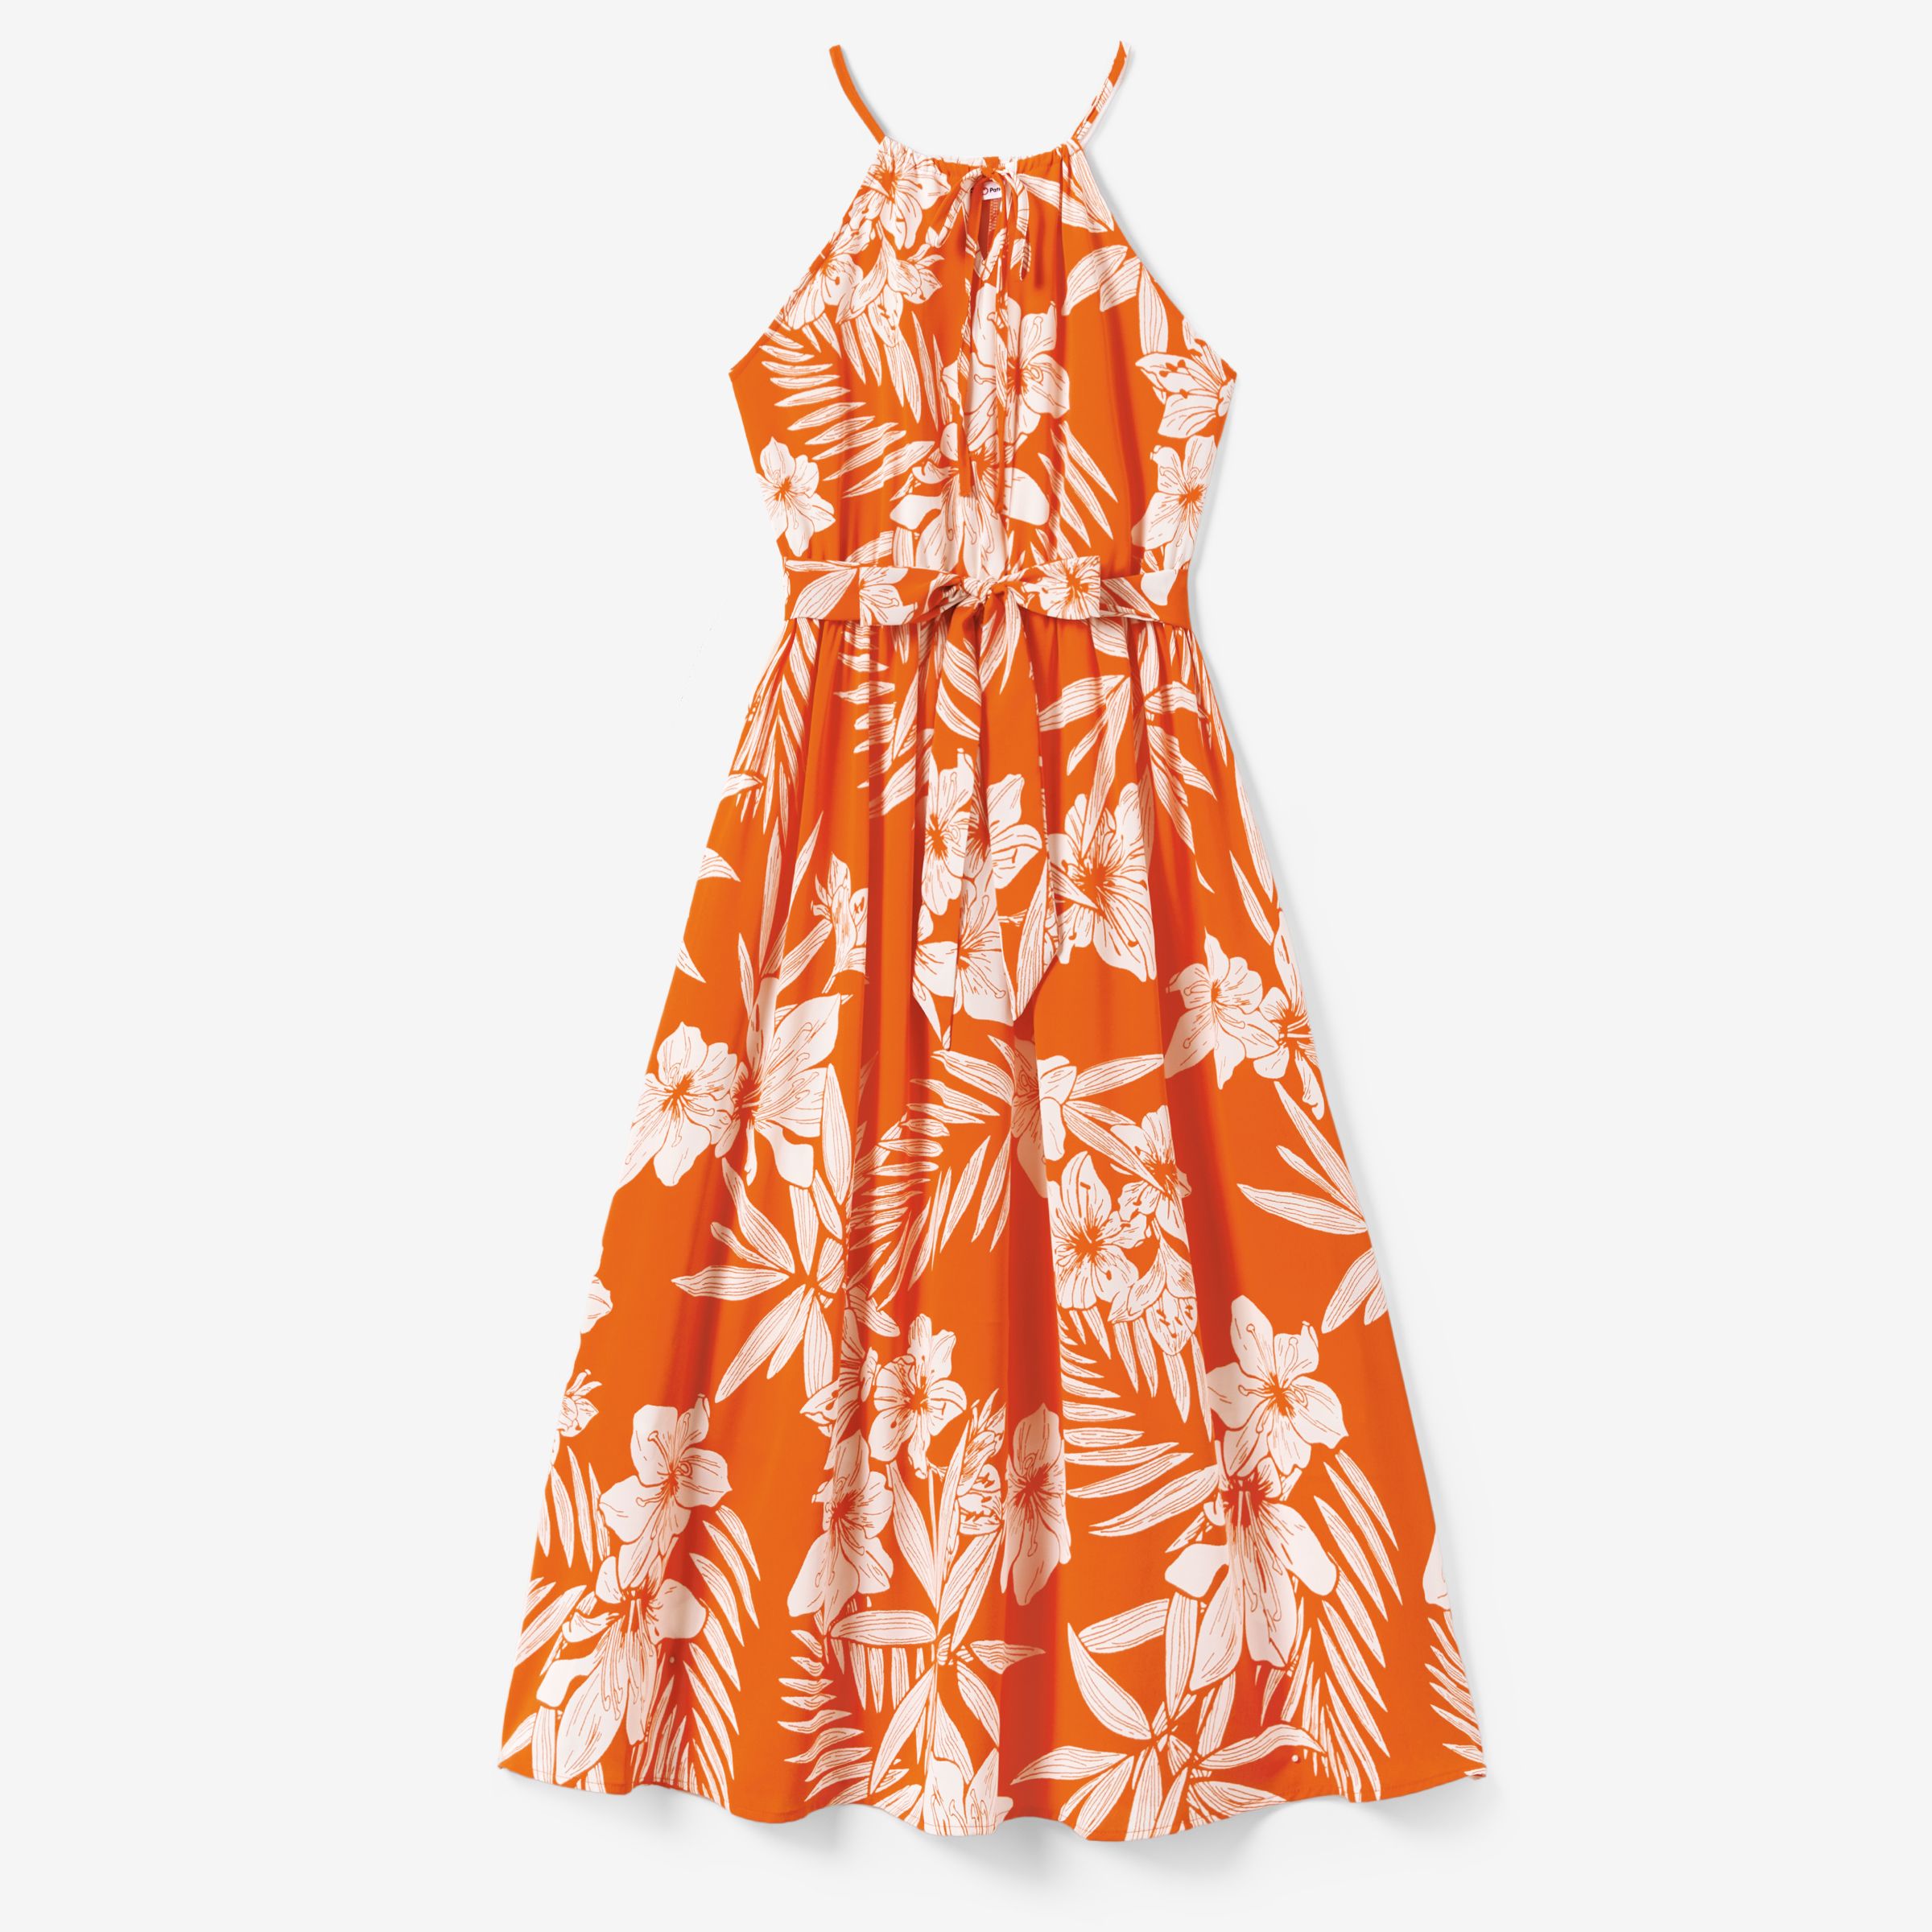 Family Matching Orange Beach Shirt And Floral Strap Dress Sets